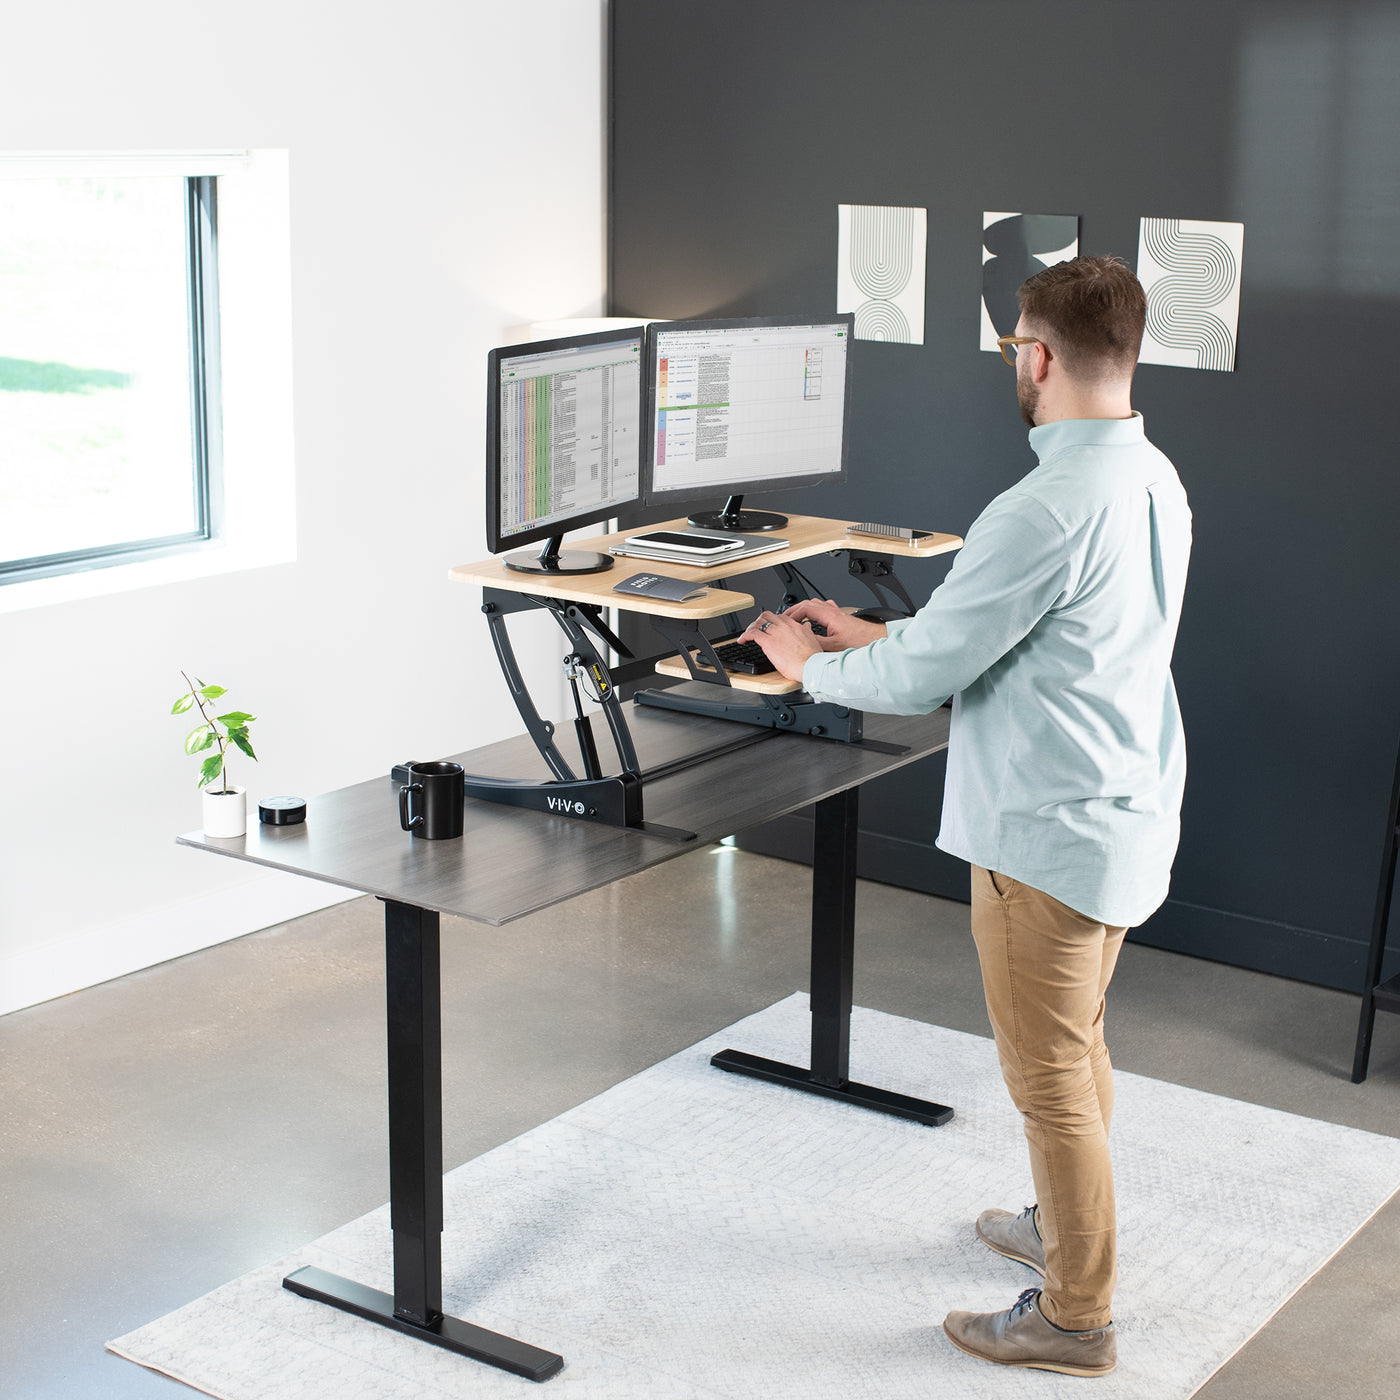 VEVOR Standing Desk Converter, Two-Tier Stand up Desk Riser, 36 inch Large  Sit to Stand Desk Converter, 5.5-20.1 inch Adjustable Height, for Monitor,  Keyboard & Accessories Used in Home Office